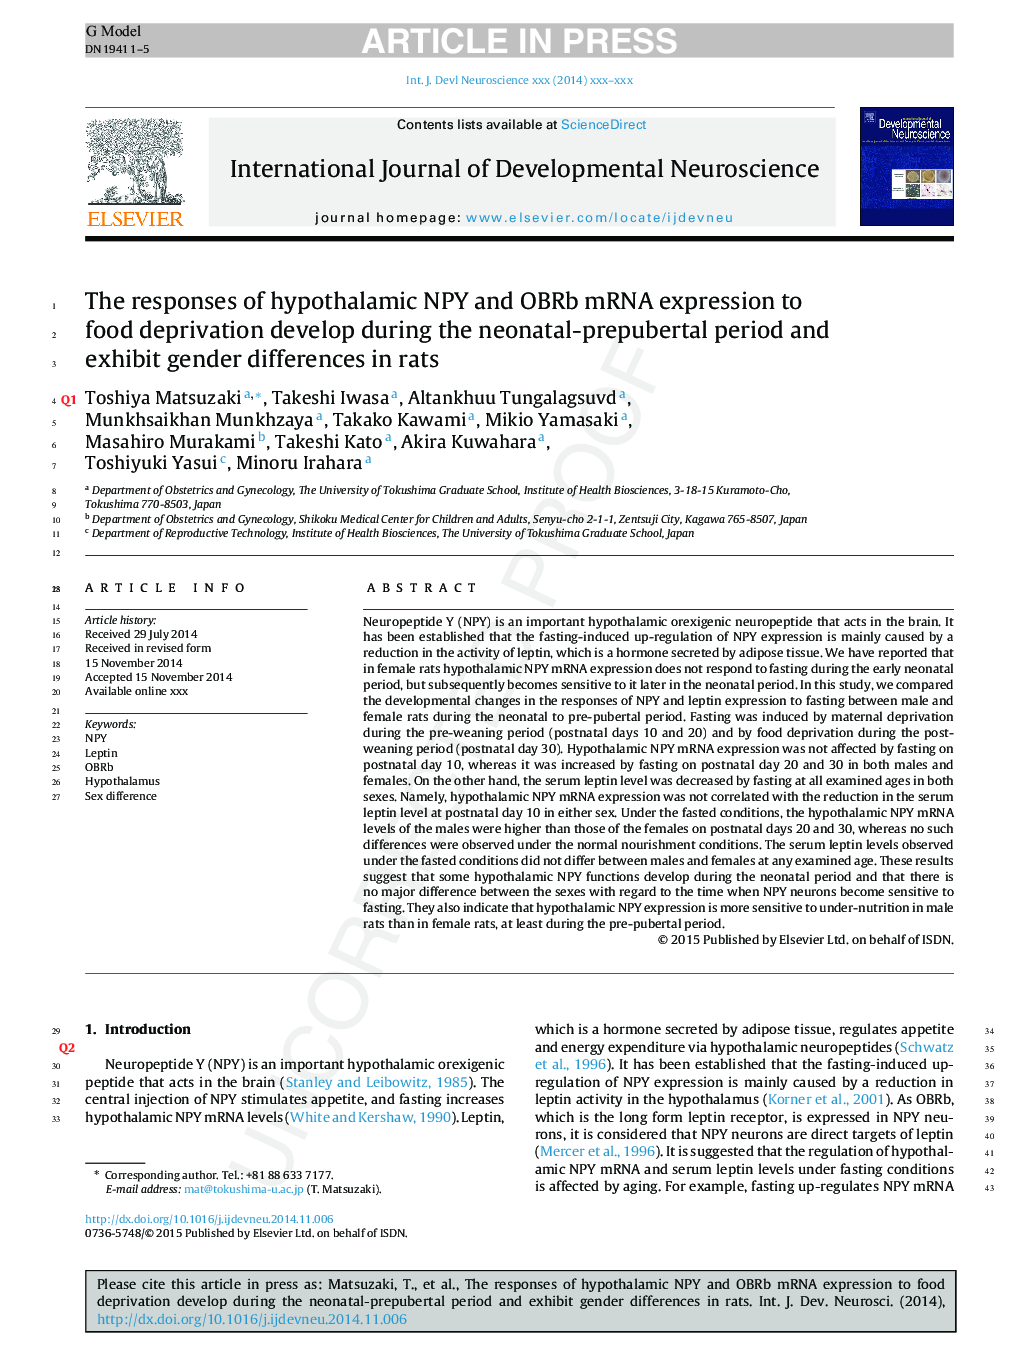 The responses of hypothalamic NPY and OBRb mRNA expression to food deprivation develop during the neonatal-prepubertal period and exhibit gender differences in rats